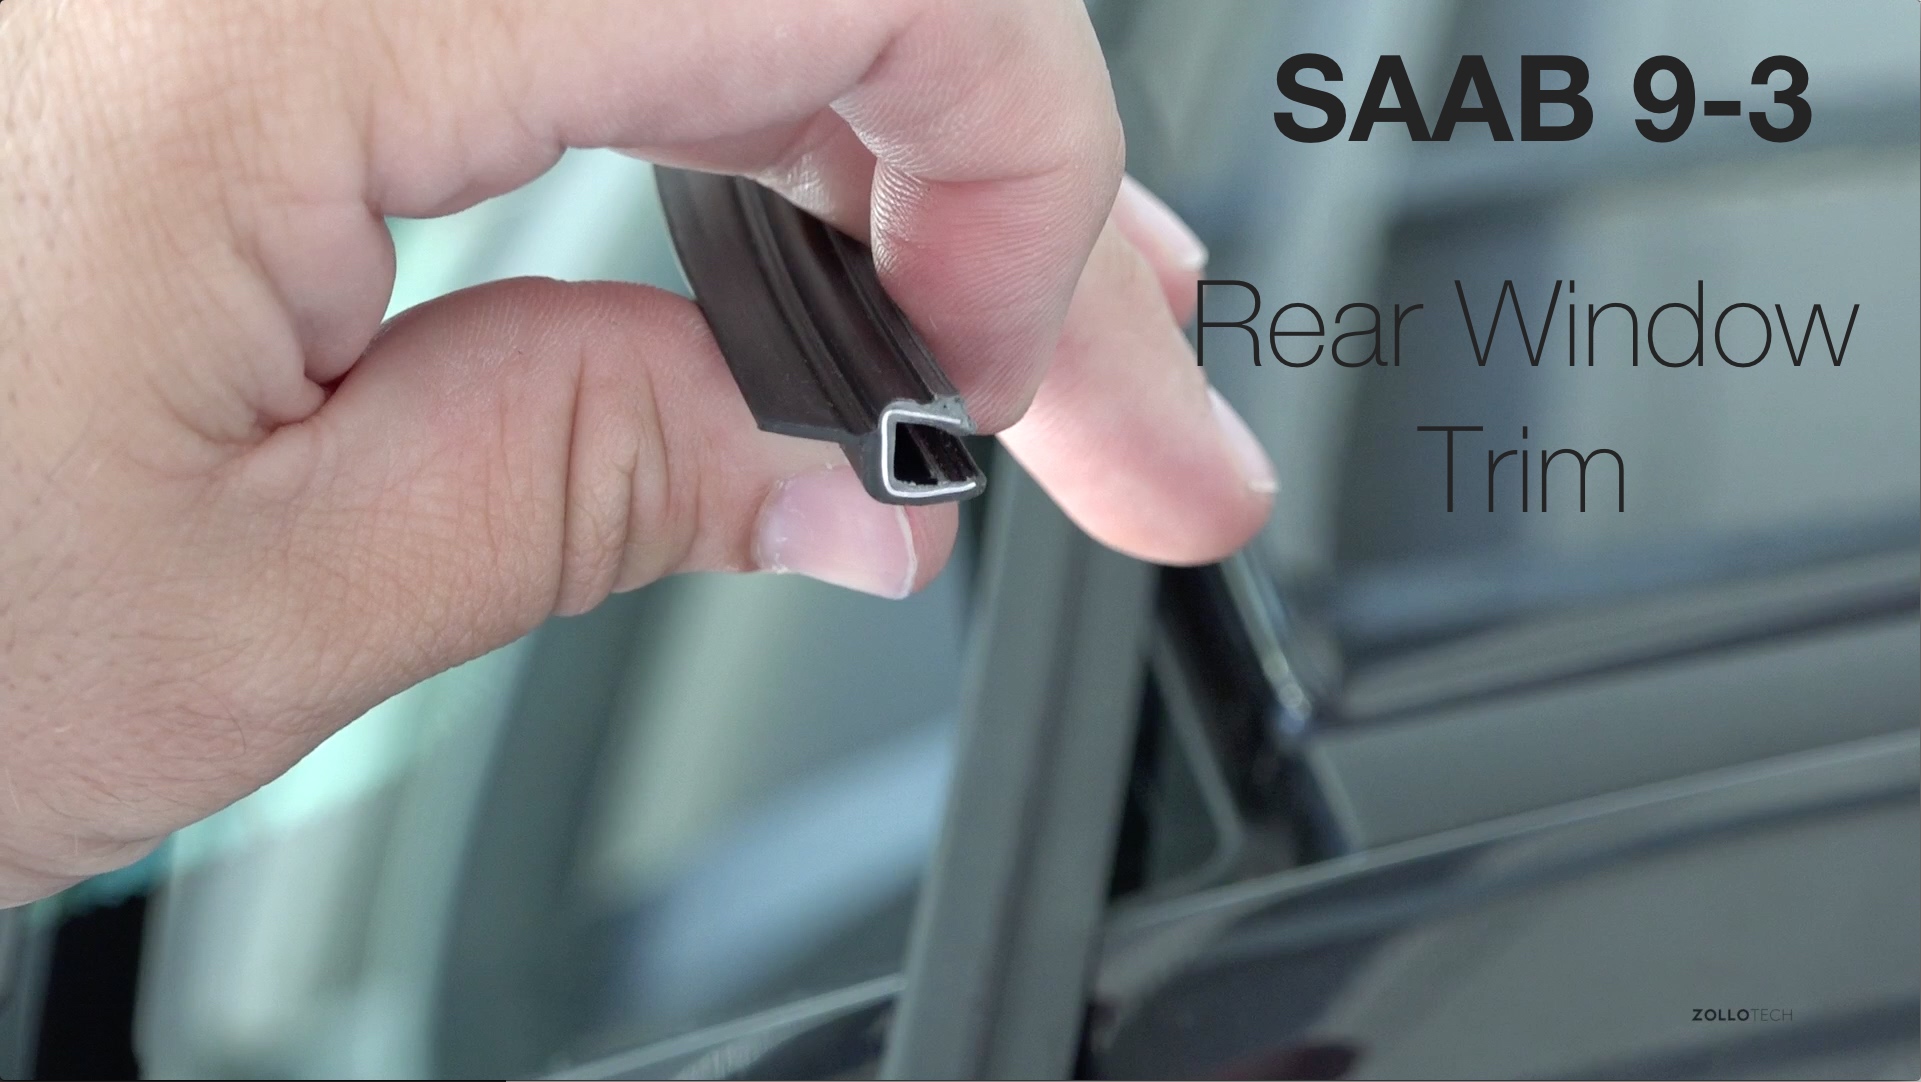 Saab 9-3 – How To Replace Rear Window Trim